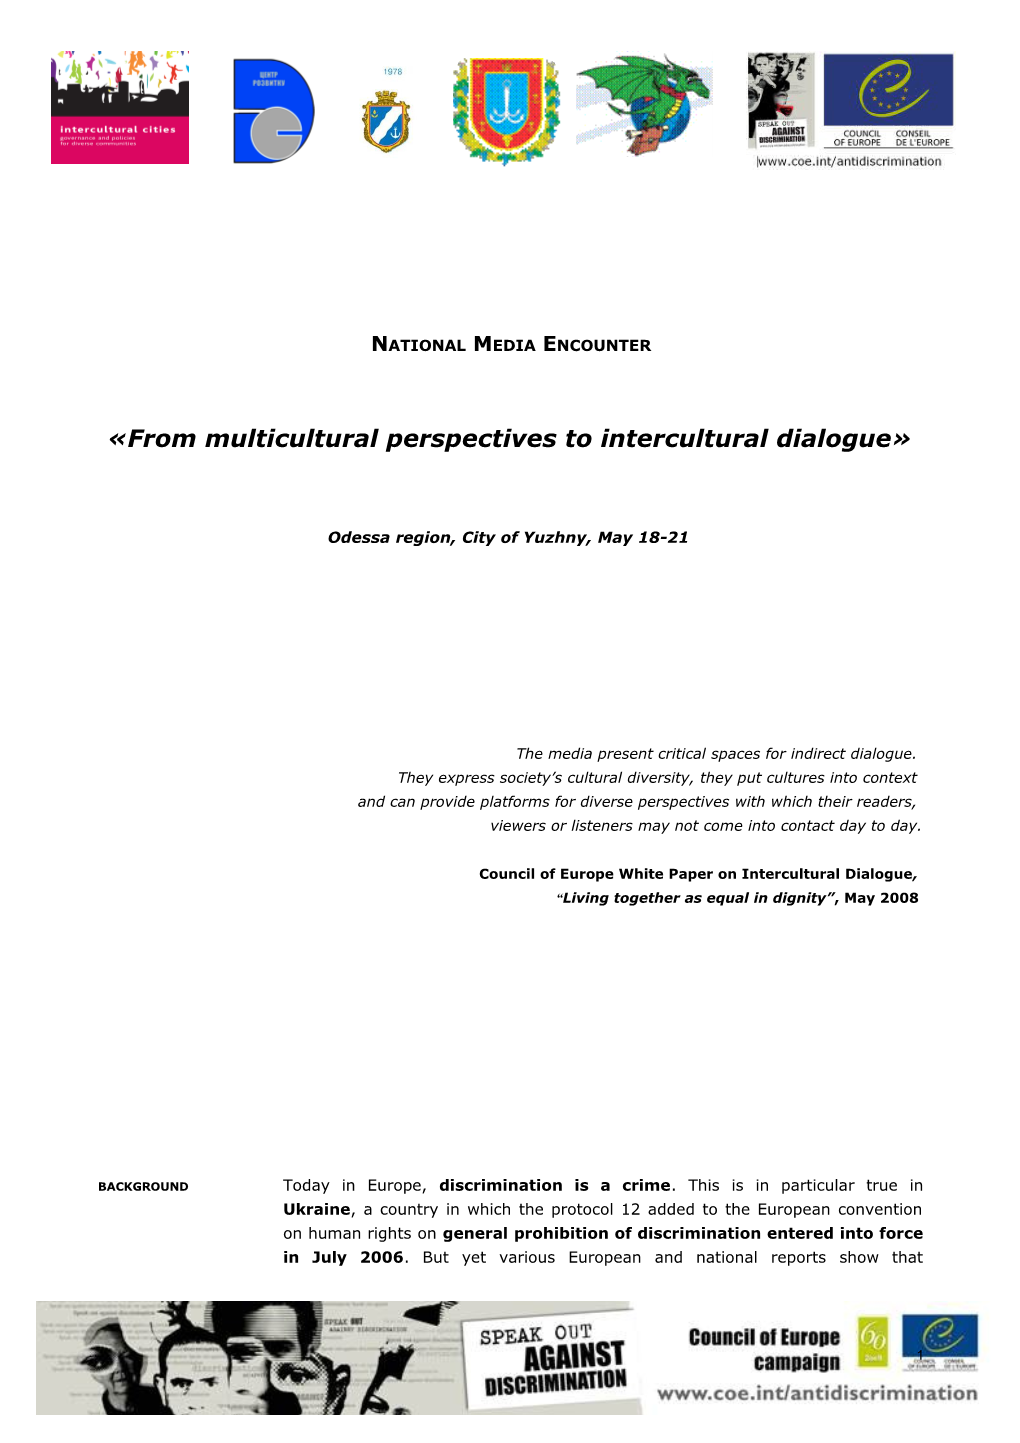 From Multicultural Perspectives to Intercultural Dialogue